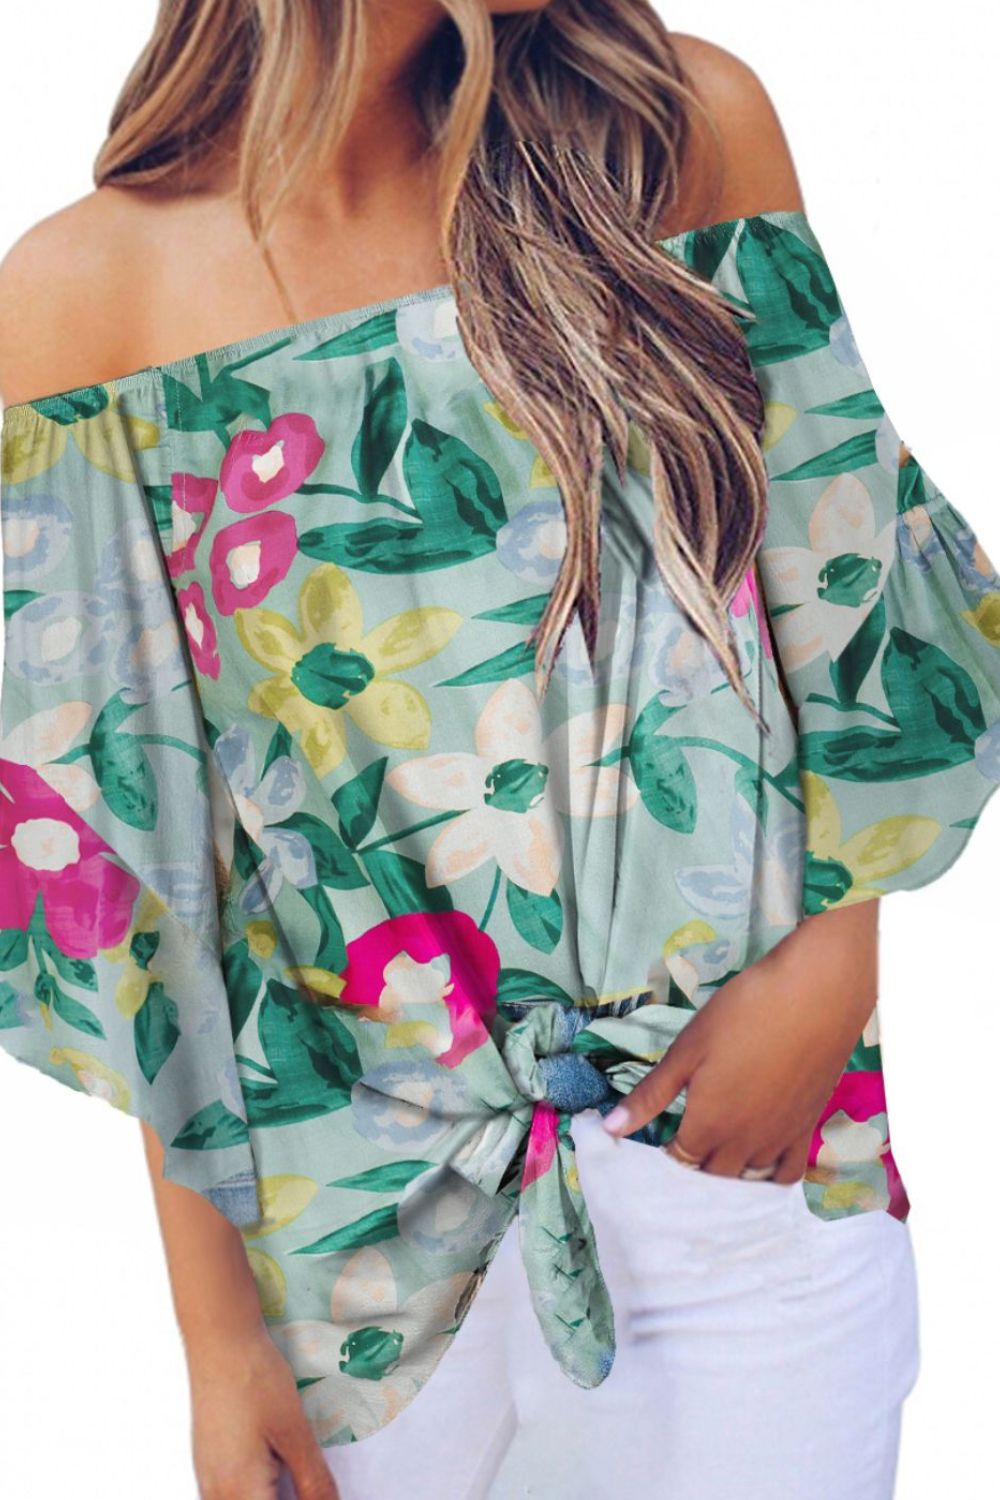 Tied Printed Off-Shoulder Half Sleeve Blouse [ Click for more options]